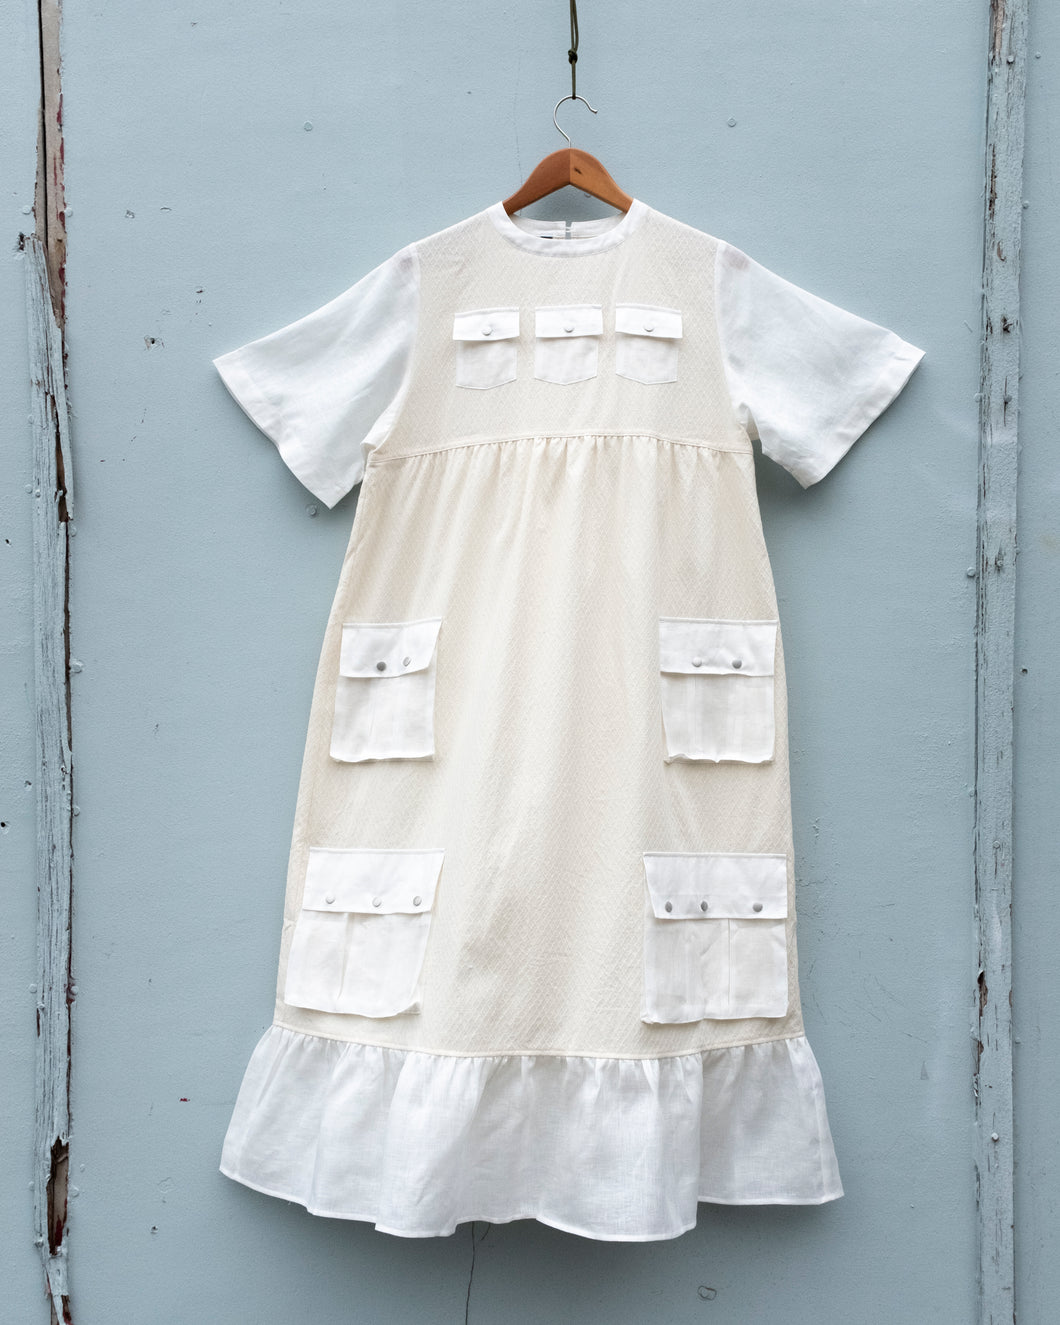 In this image, the W'menswear Summer Fortune Pocket Dress in Off-white is photographed flat. The dress features 3 small chest pockets, who medium sized pockets at hip level, and another pair of large ones below, before the peplum hem at the bottom. All with silver snap buttons.